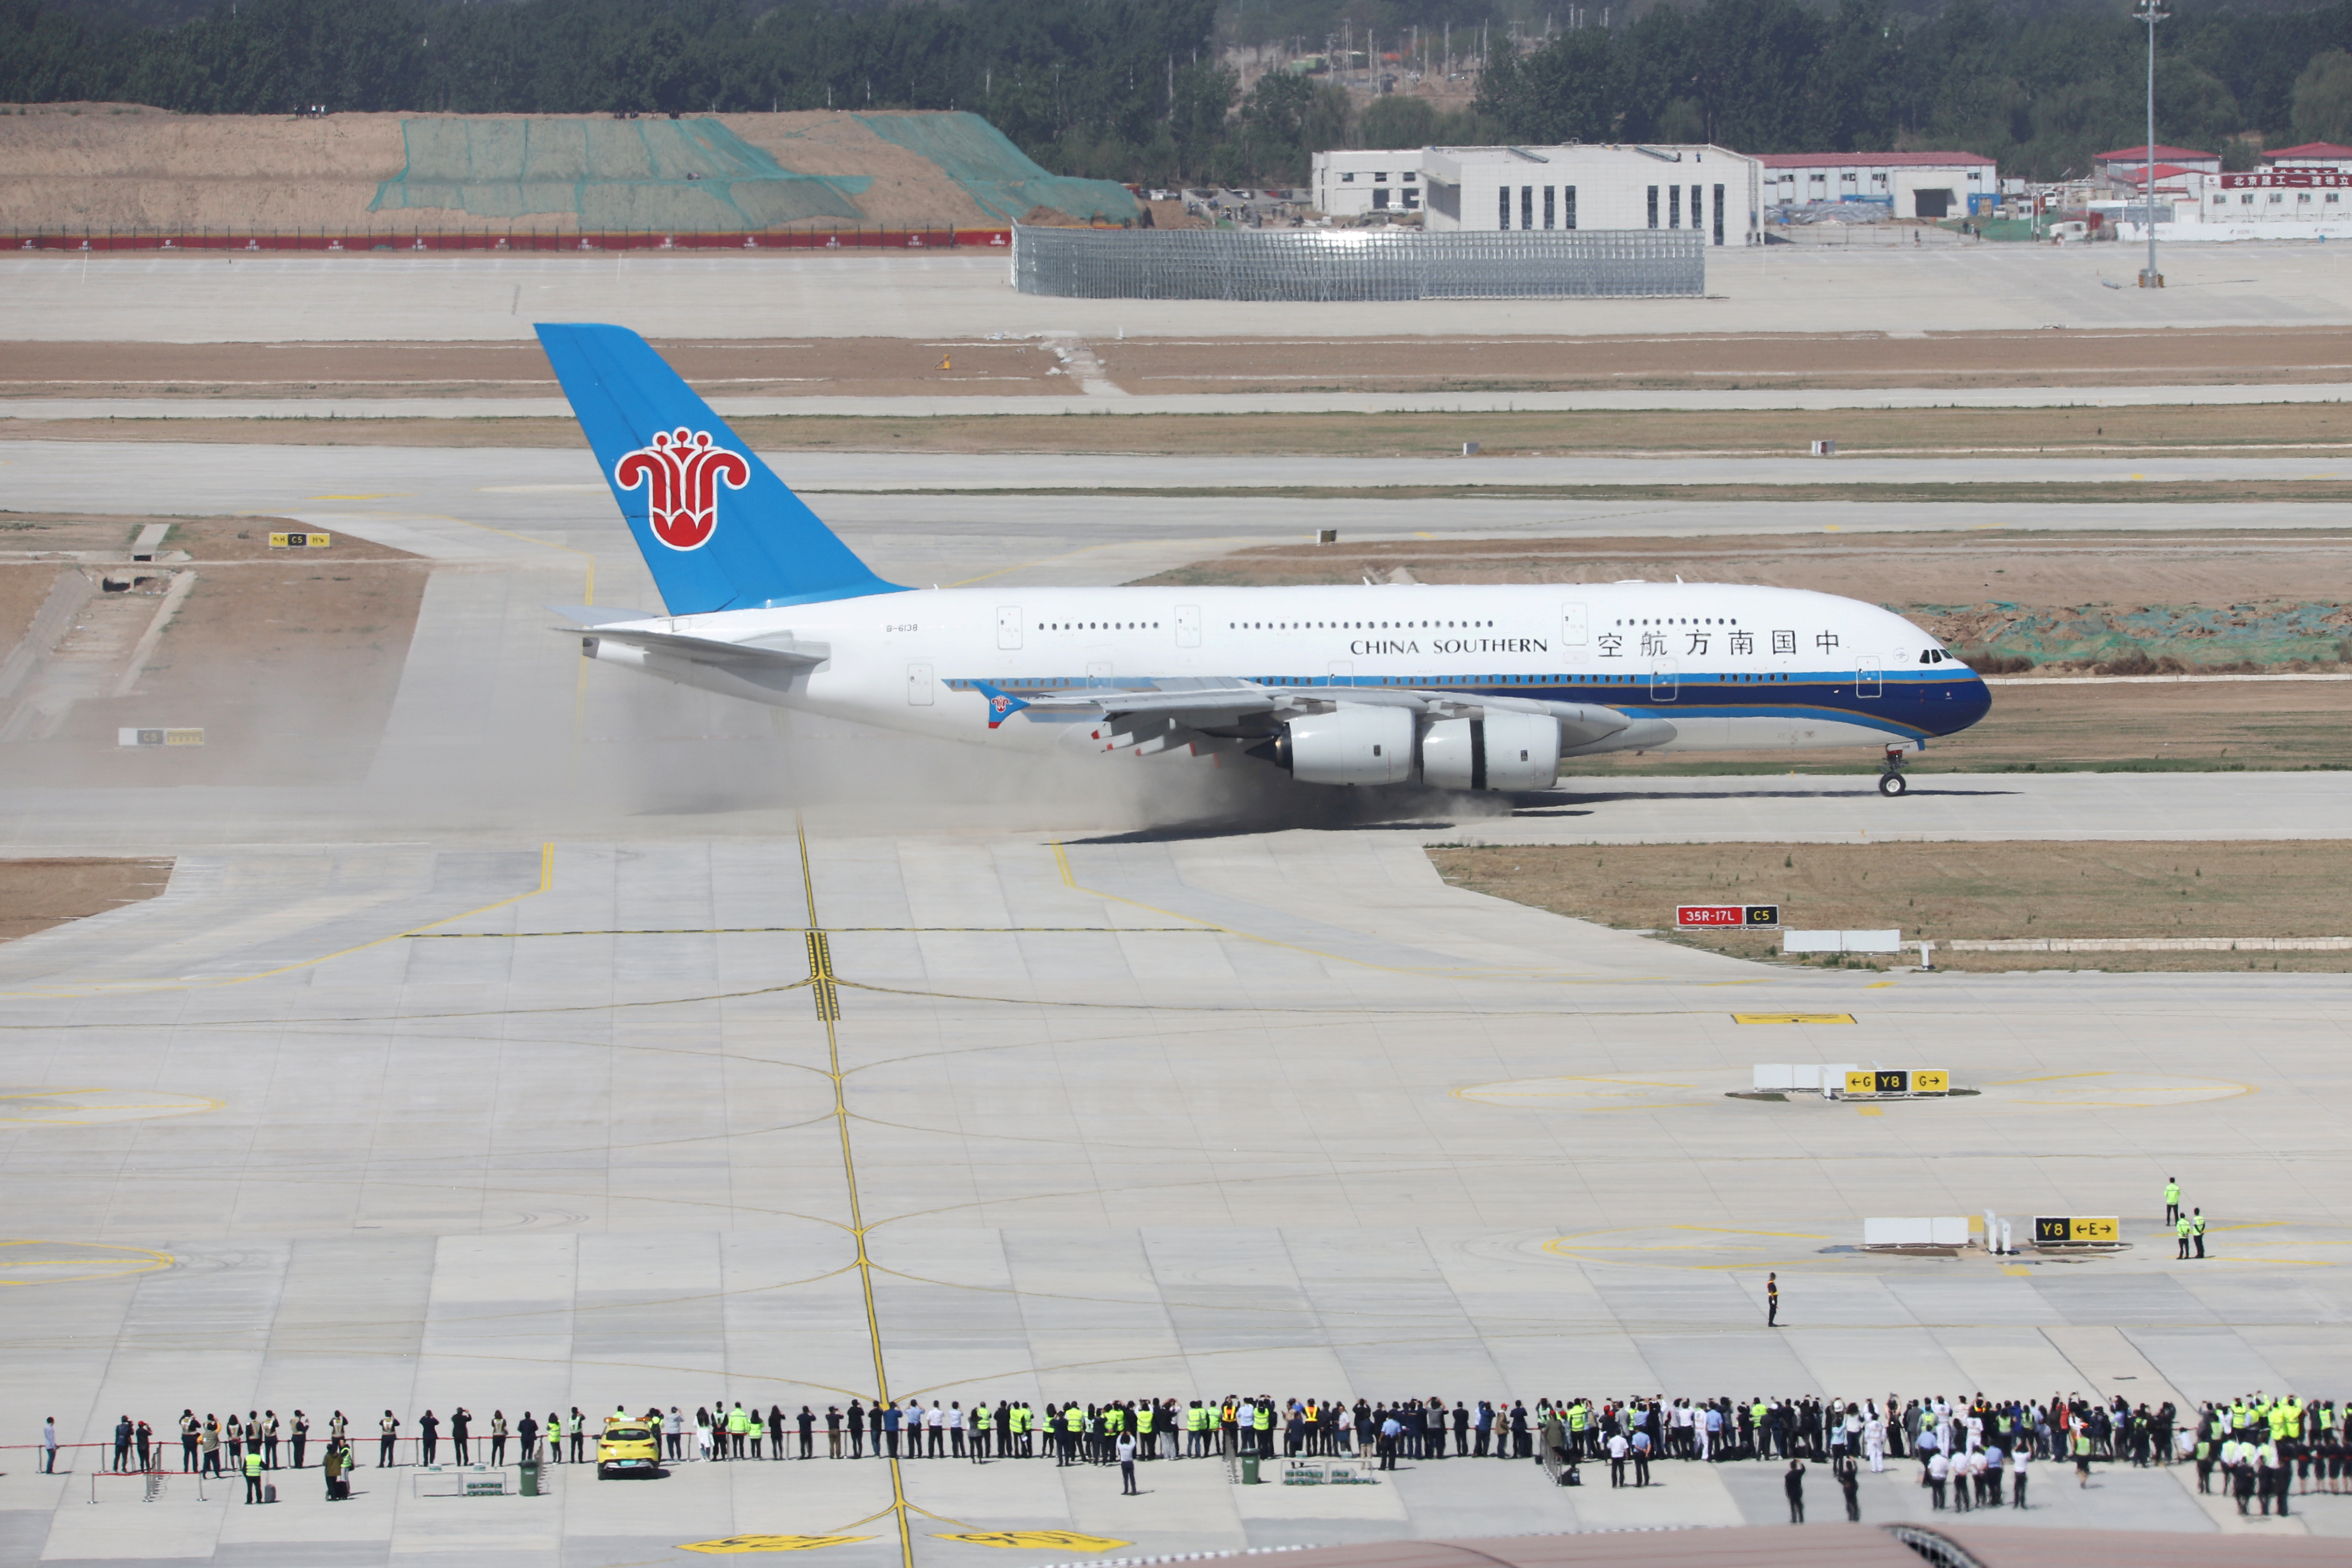 Airbus A380 aircraft from China Southern Airlines lands at the Beijing Daxing International Airport that is under construction, during a test flight in Beijing